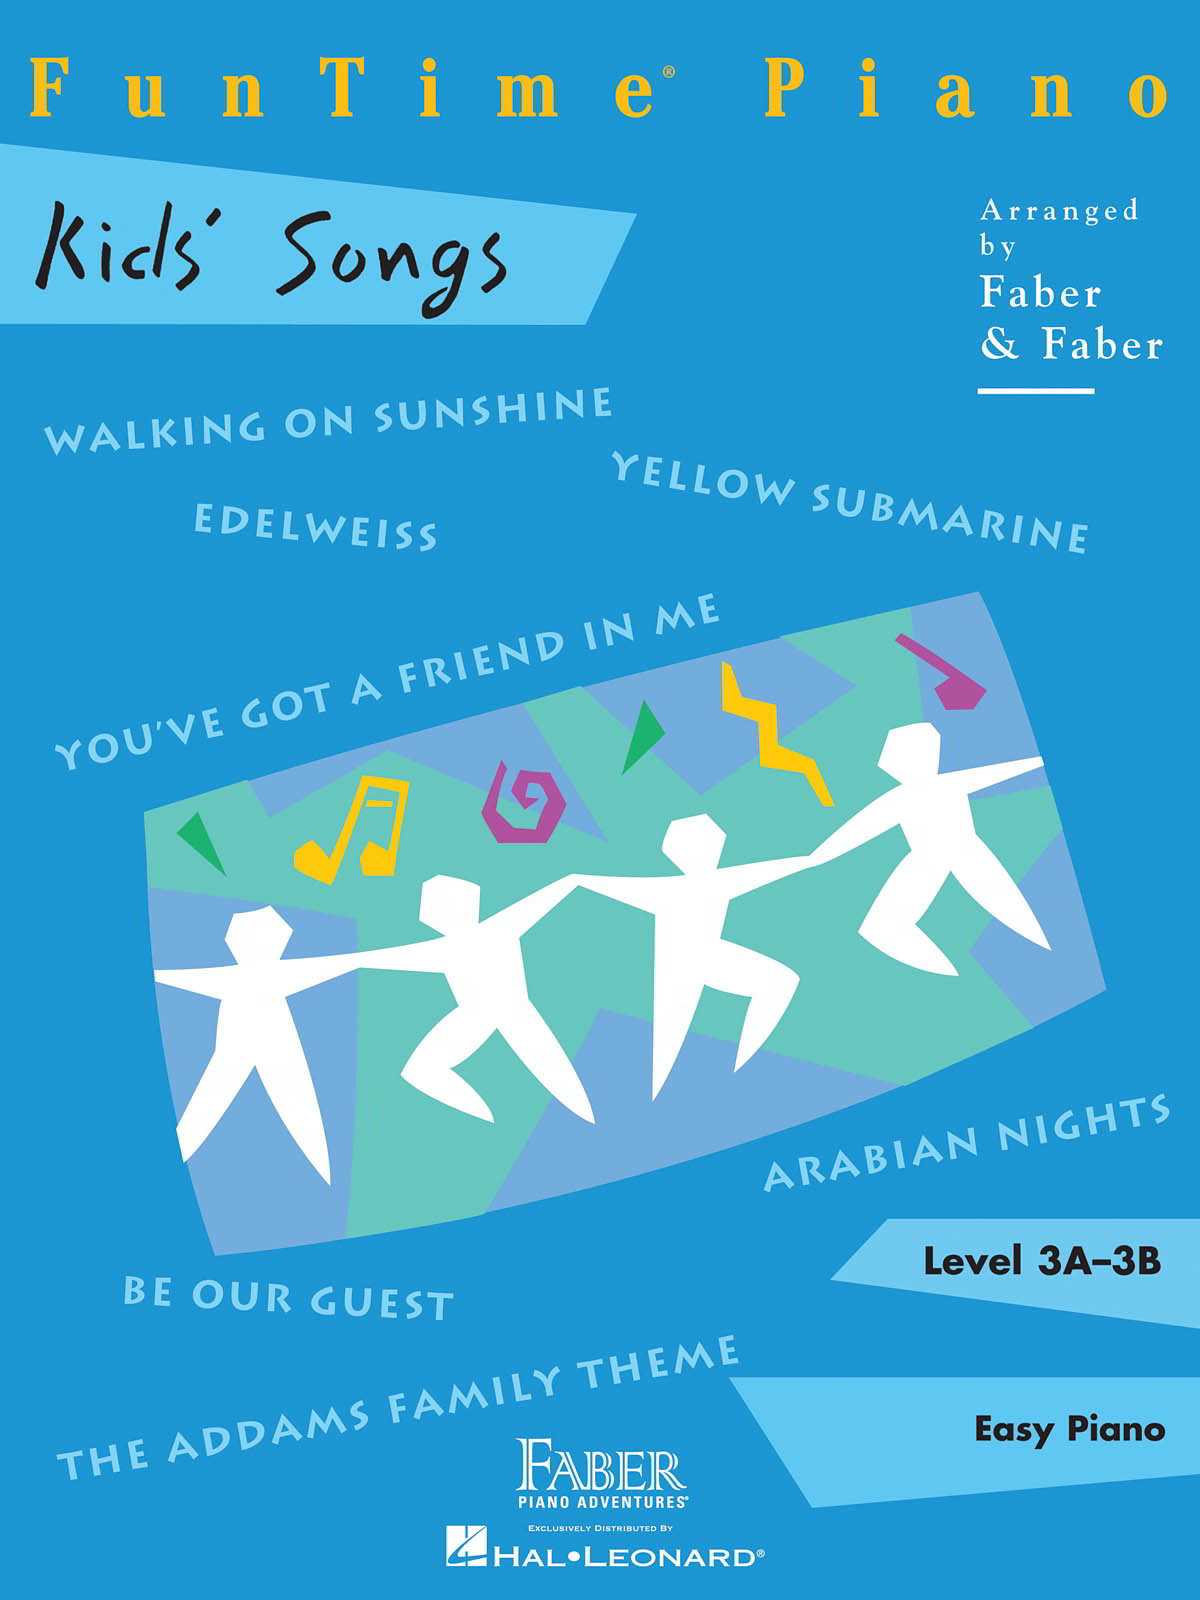 FunTime Piano Kids' Songs Level 3A - 3B